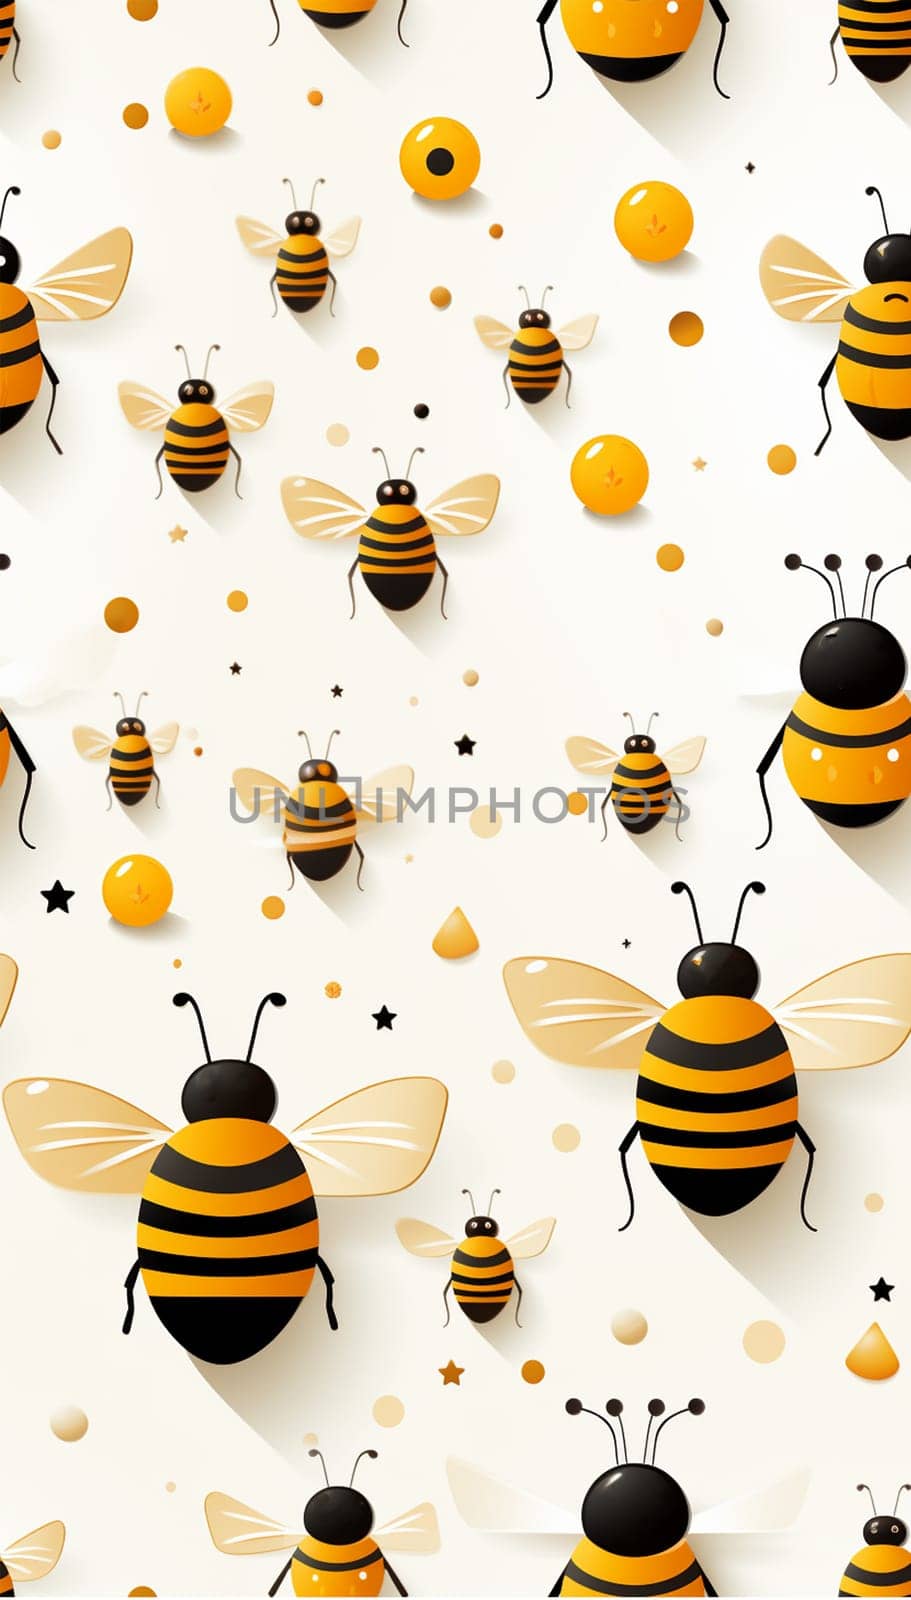 Cute bumblebee pattern. Seamless pattern of flying bees and little flowers on a light pastel background illustration. Cute cartoon character. Spring concept design by Annebel146